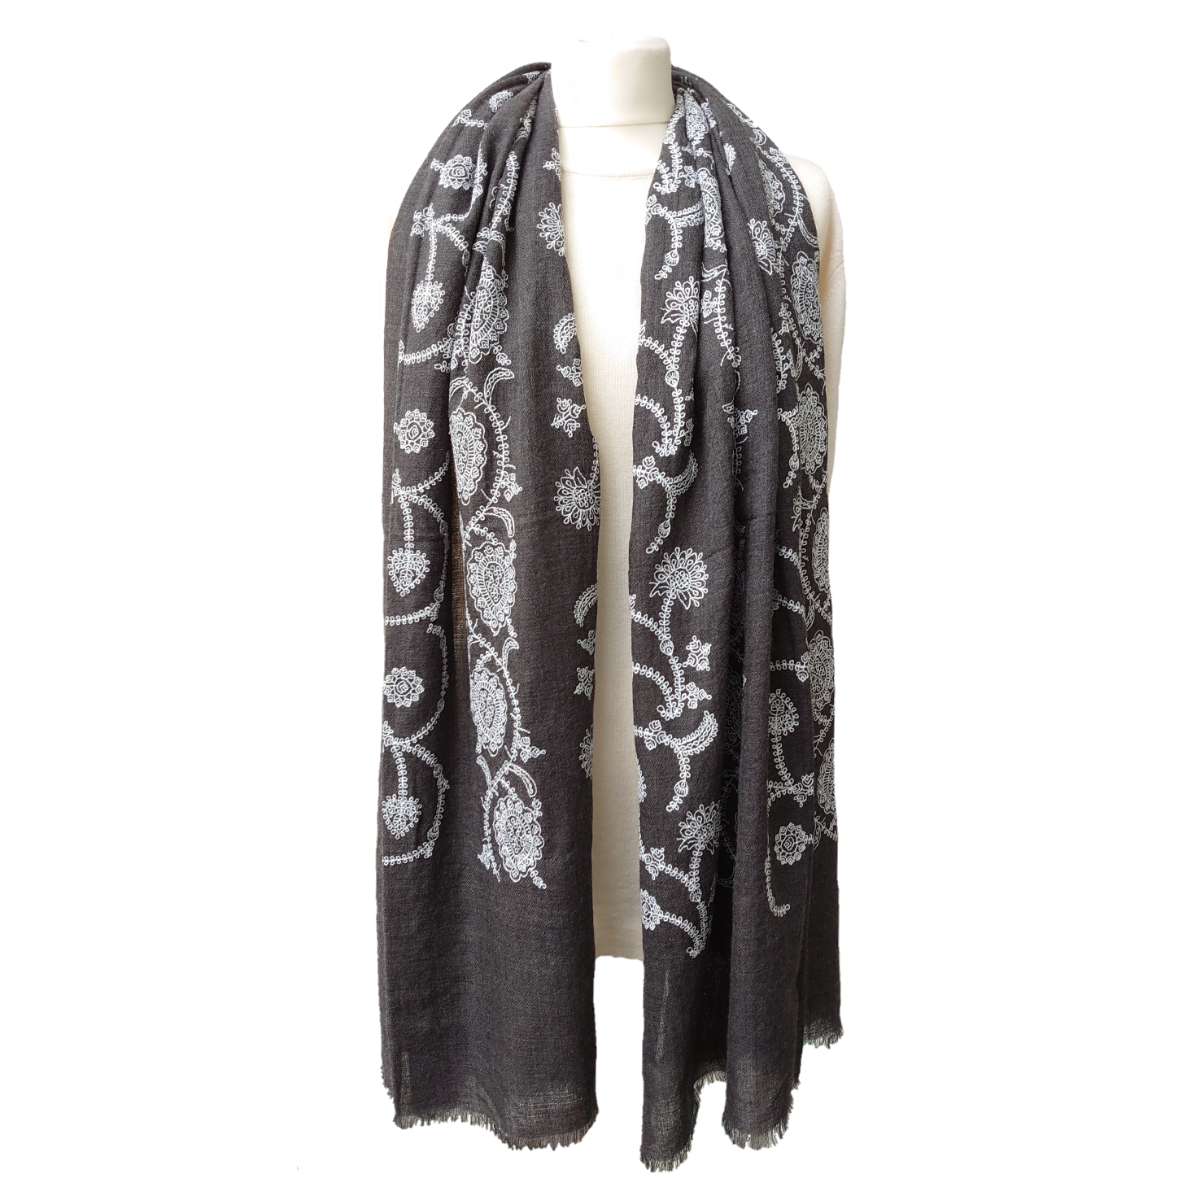 Fine Pashmina Stole - Large Scarf - Dark Grey with White Embroidered Design